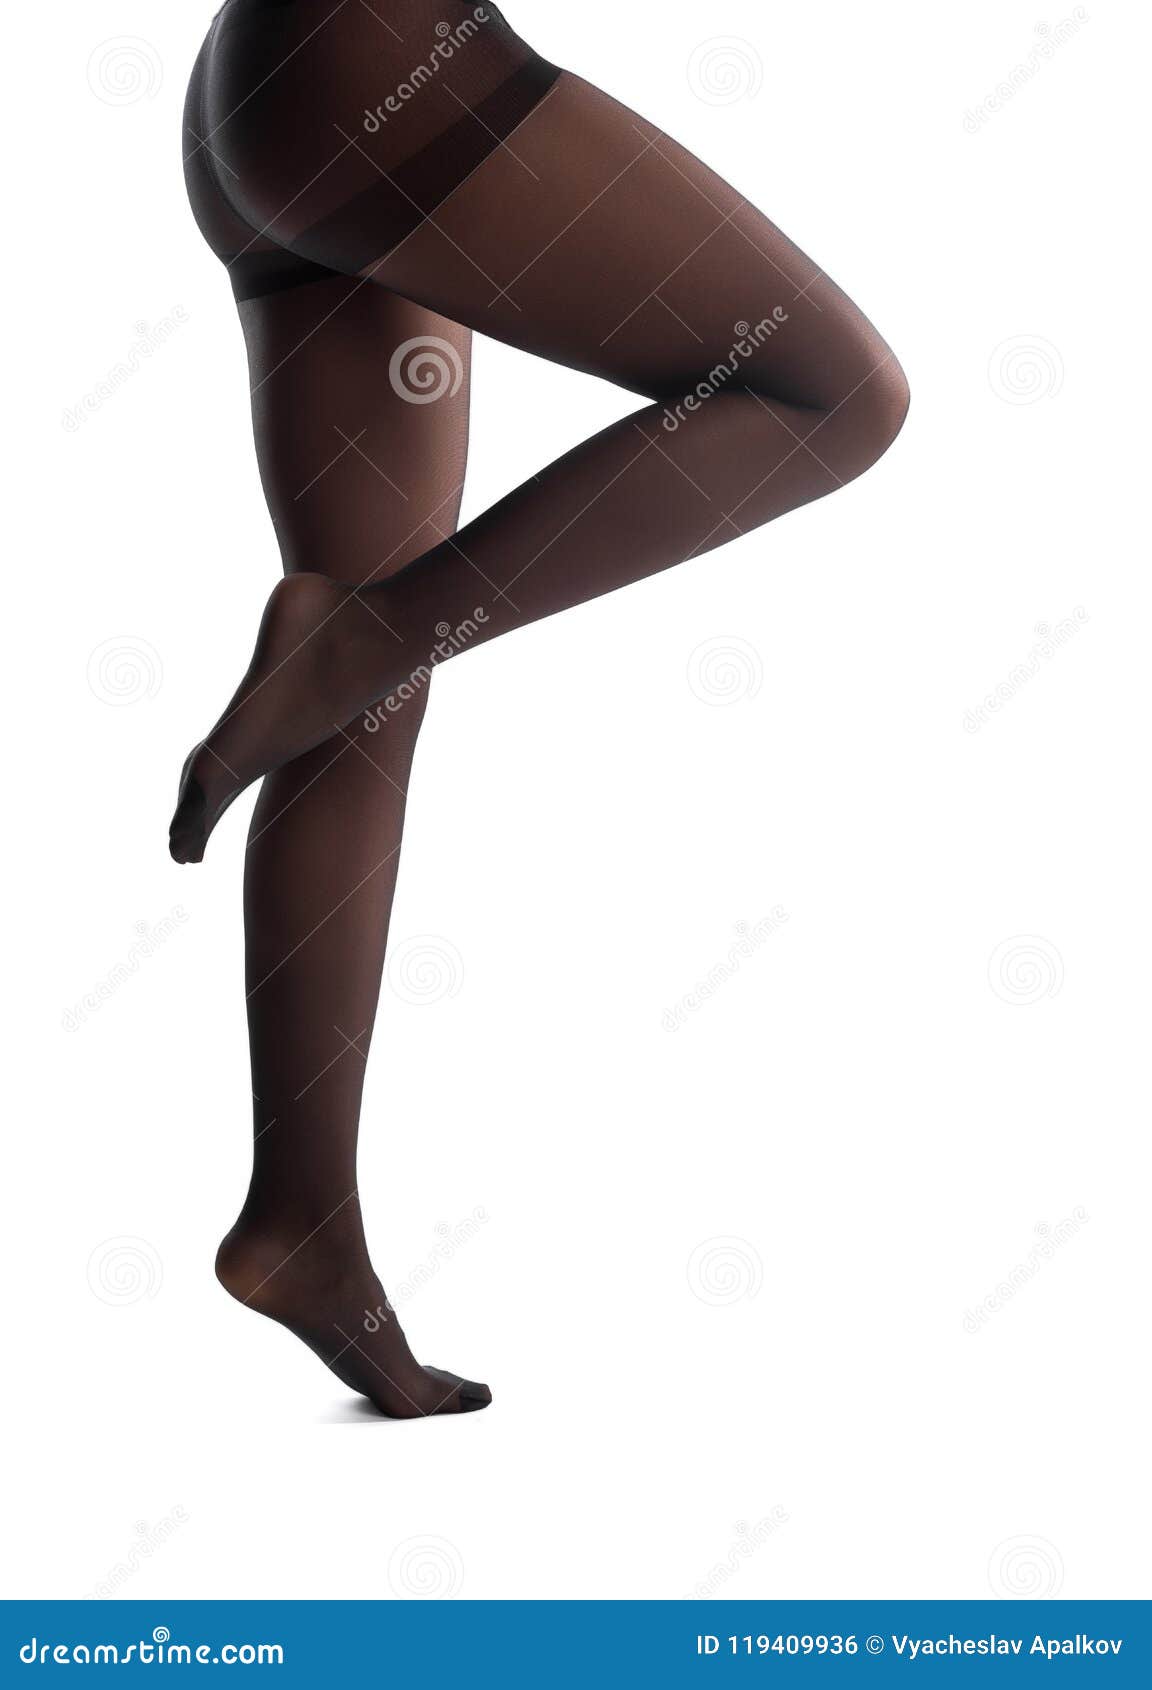 chris spadoni recommends nice legs in pantyhose pic